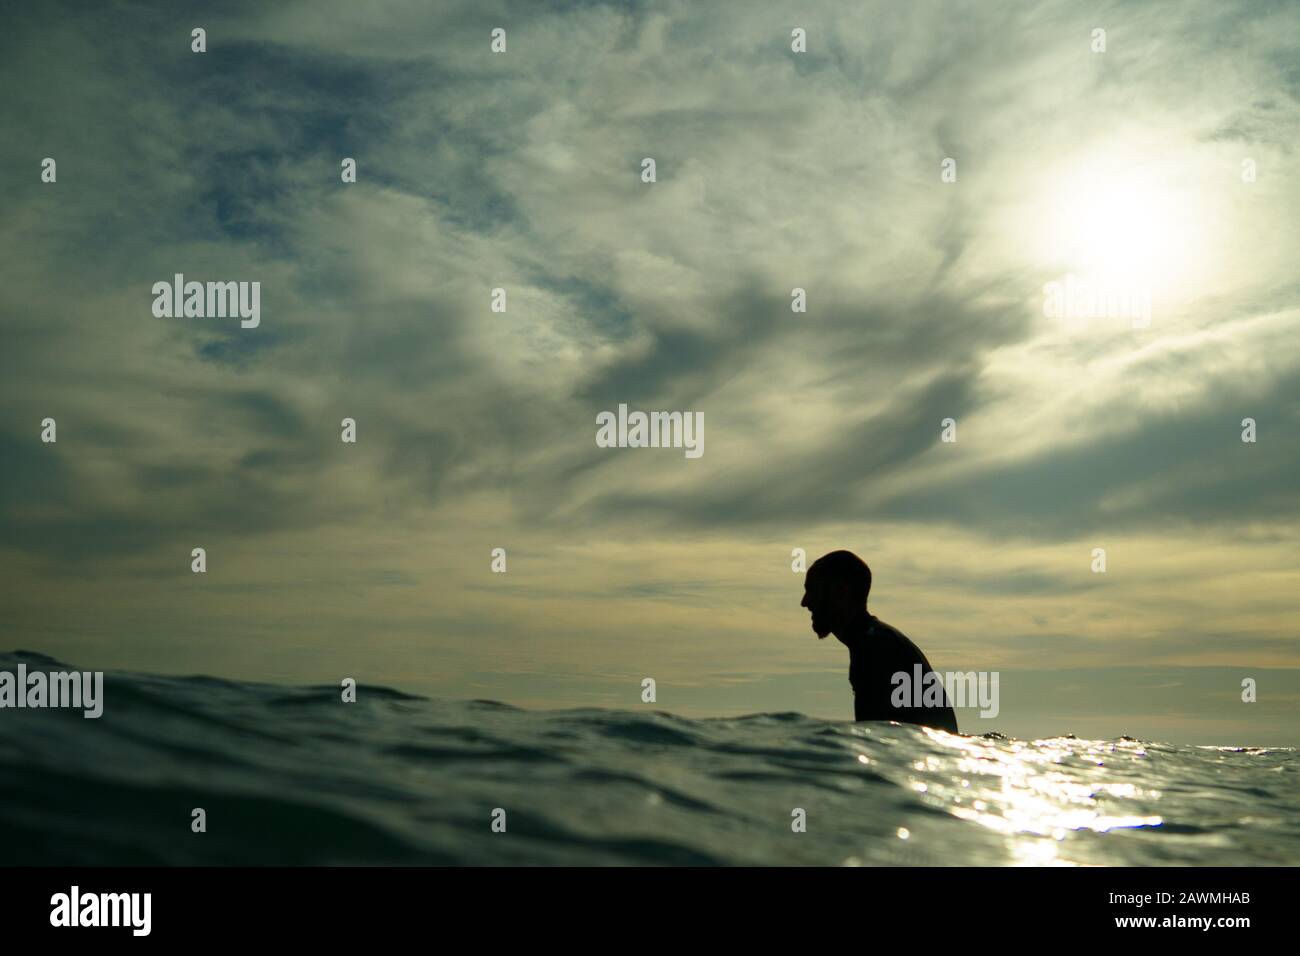 A young male surfer in a black wetsuit with a goatee beard sits in silhouette on a surfboard waiting for a wave at Piha Beach, Piha, West Auckland. Stock Photo